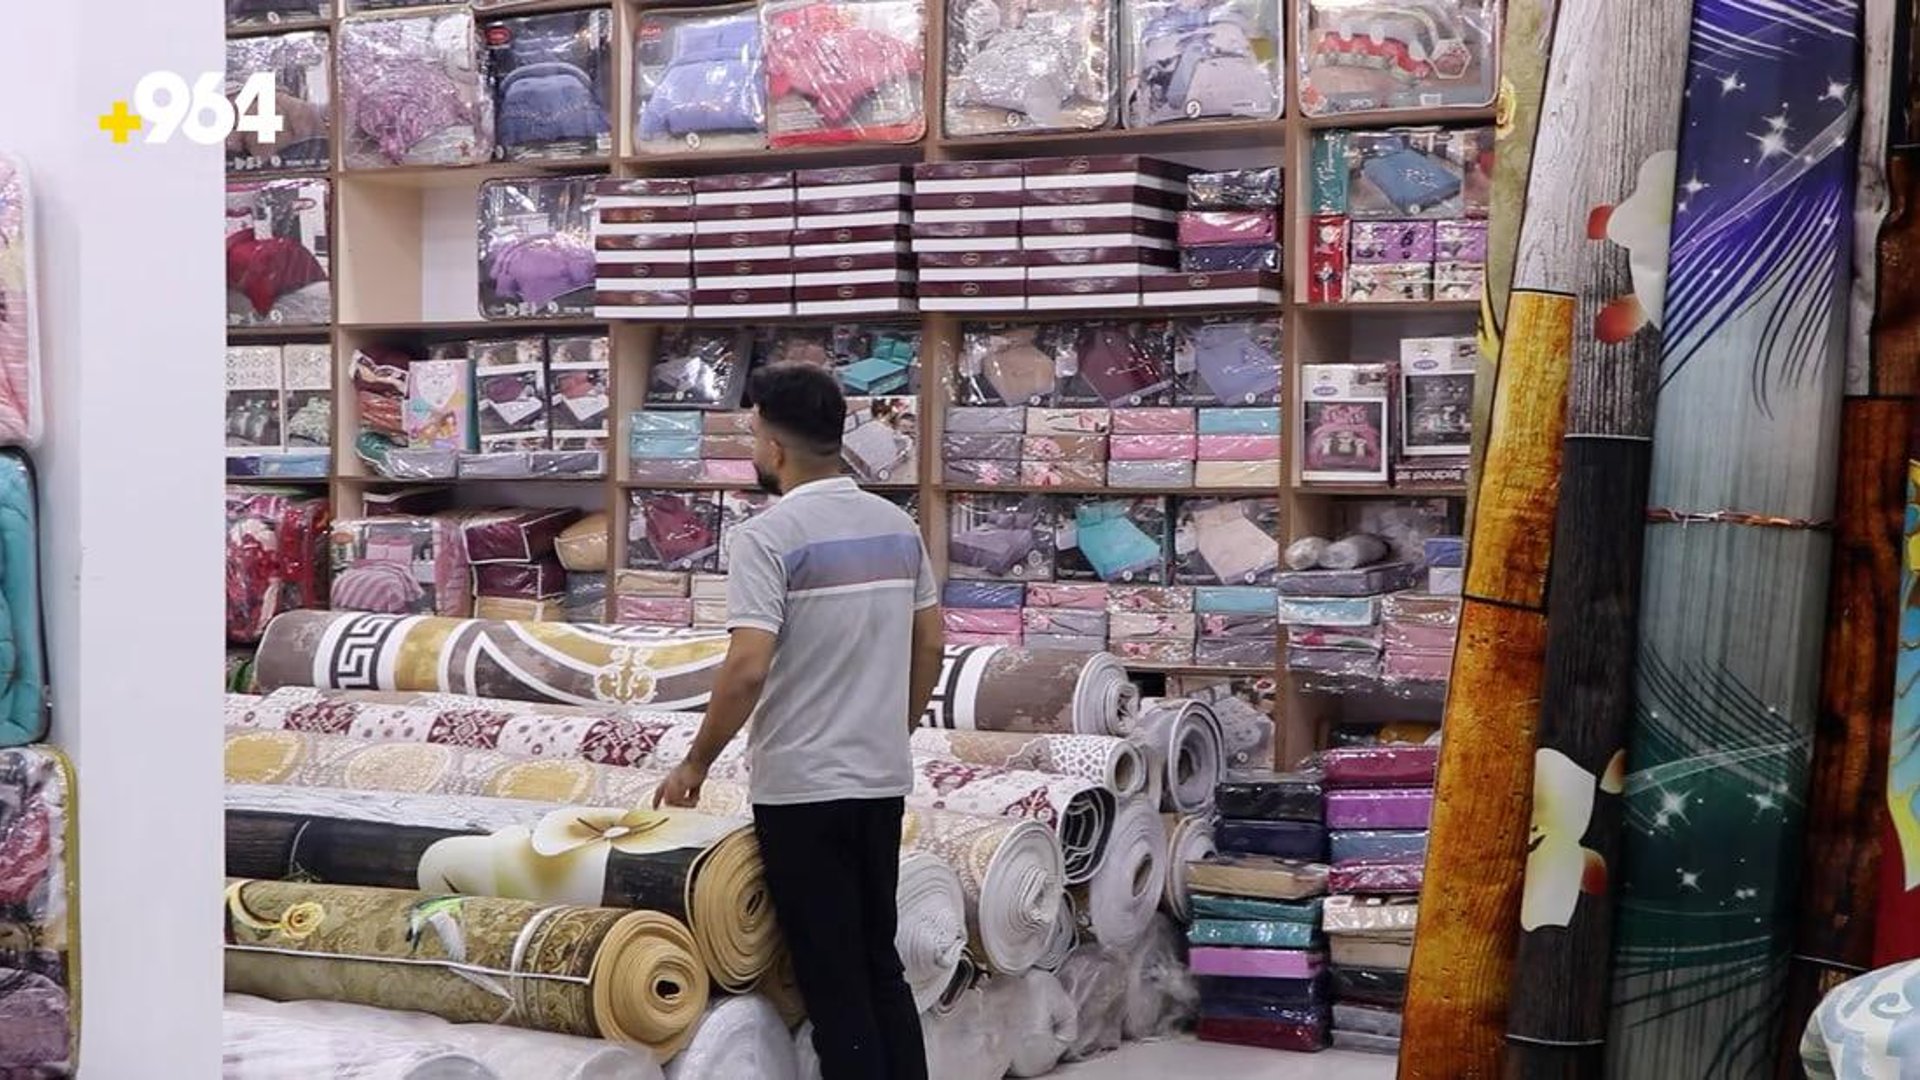 Carpet and rug sales rise in AlKut ahead of winter